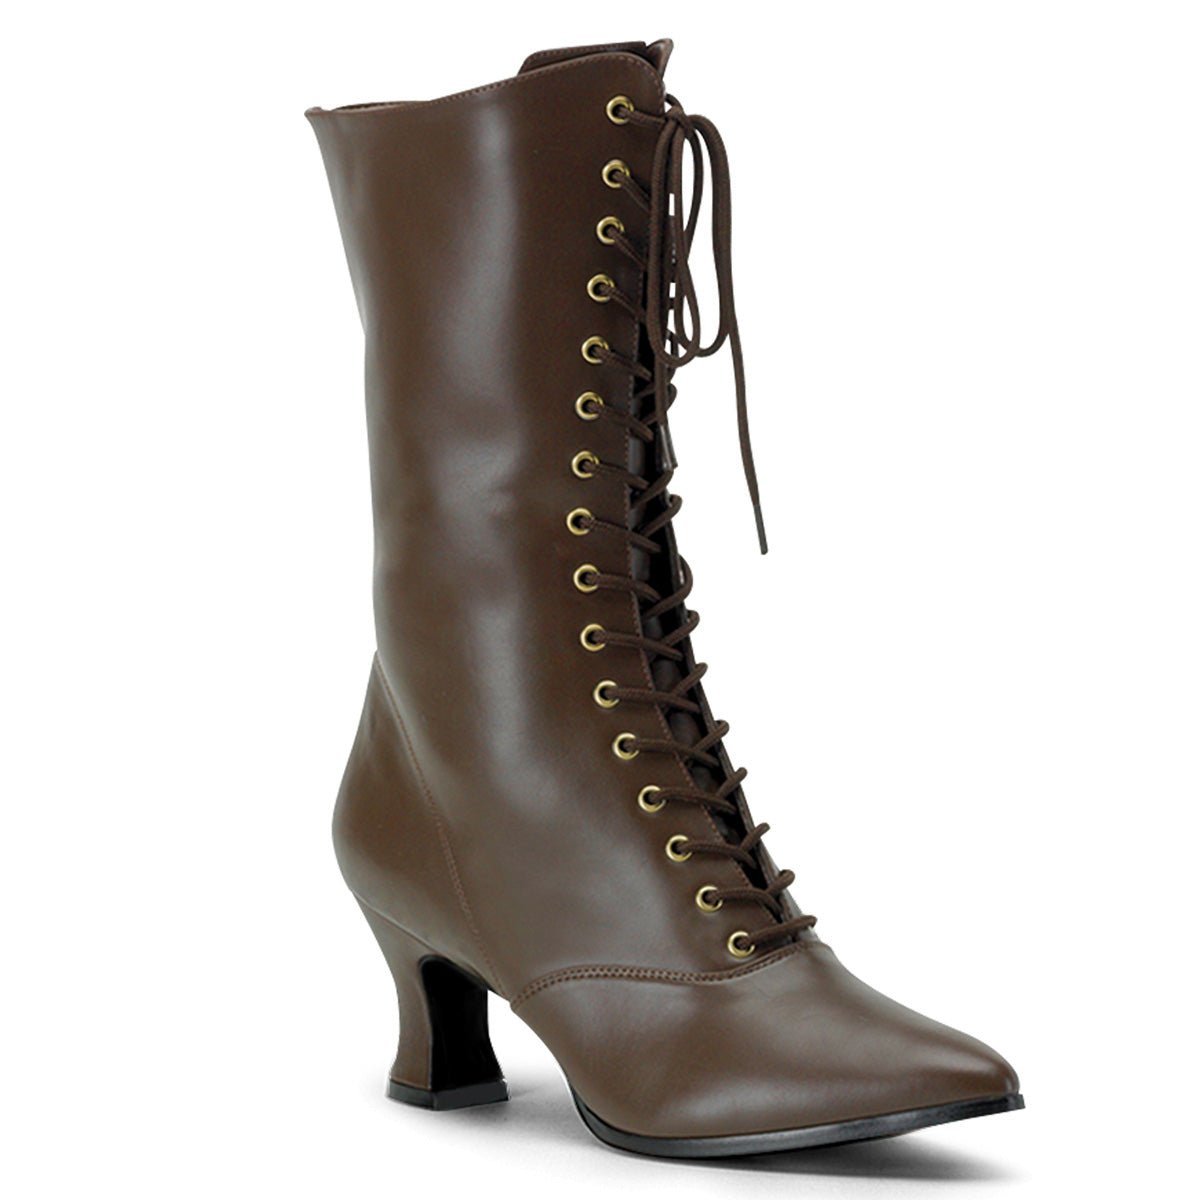 Clearance Funtasma VICTORIAN 120 Brown Size 3UK/6USA - From Clearance Sold By Alternative Footwear